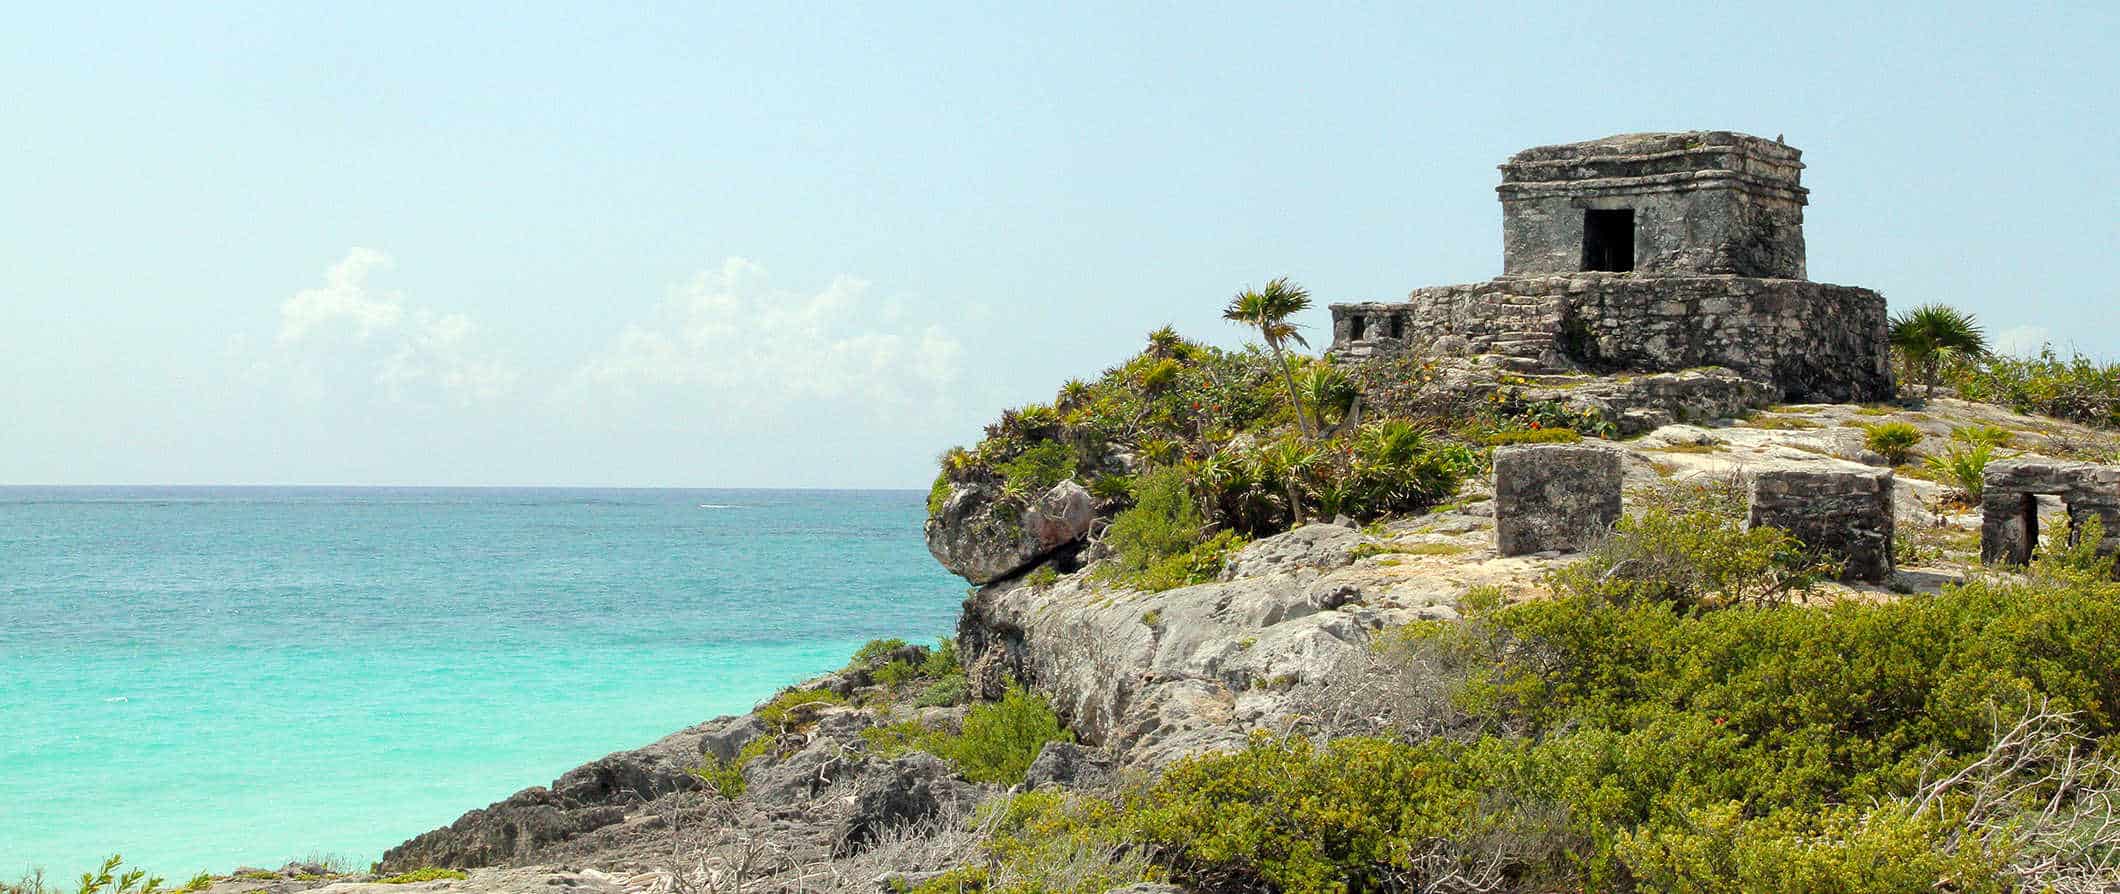 Historic ruins near the ocean in Tulum, Mexico with lush greenery on a sunny day